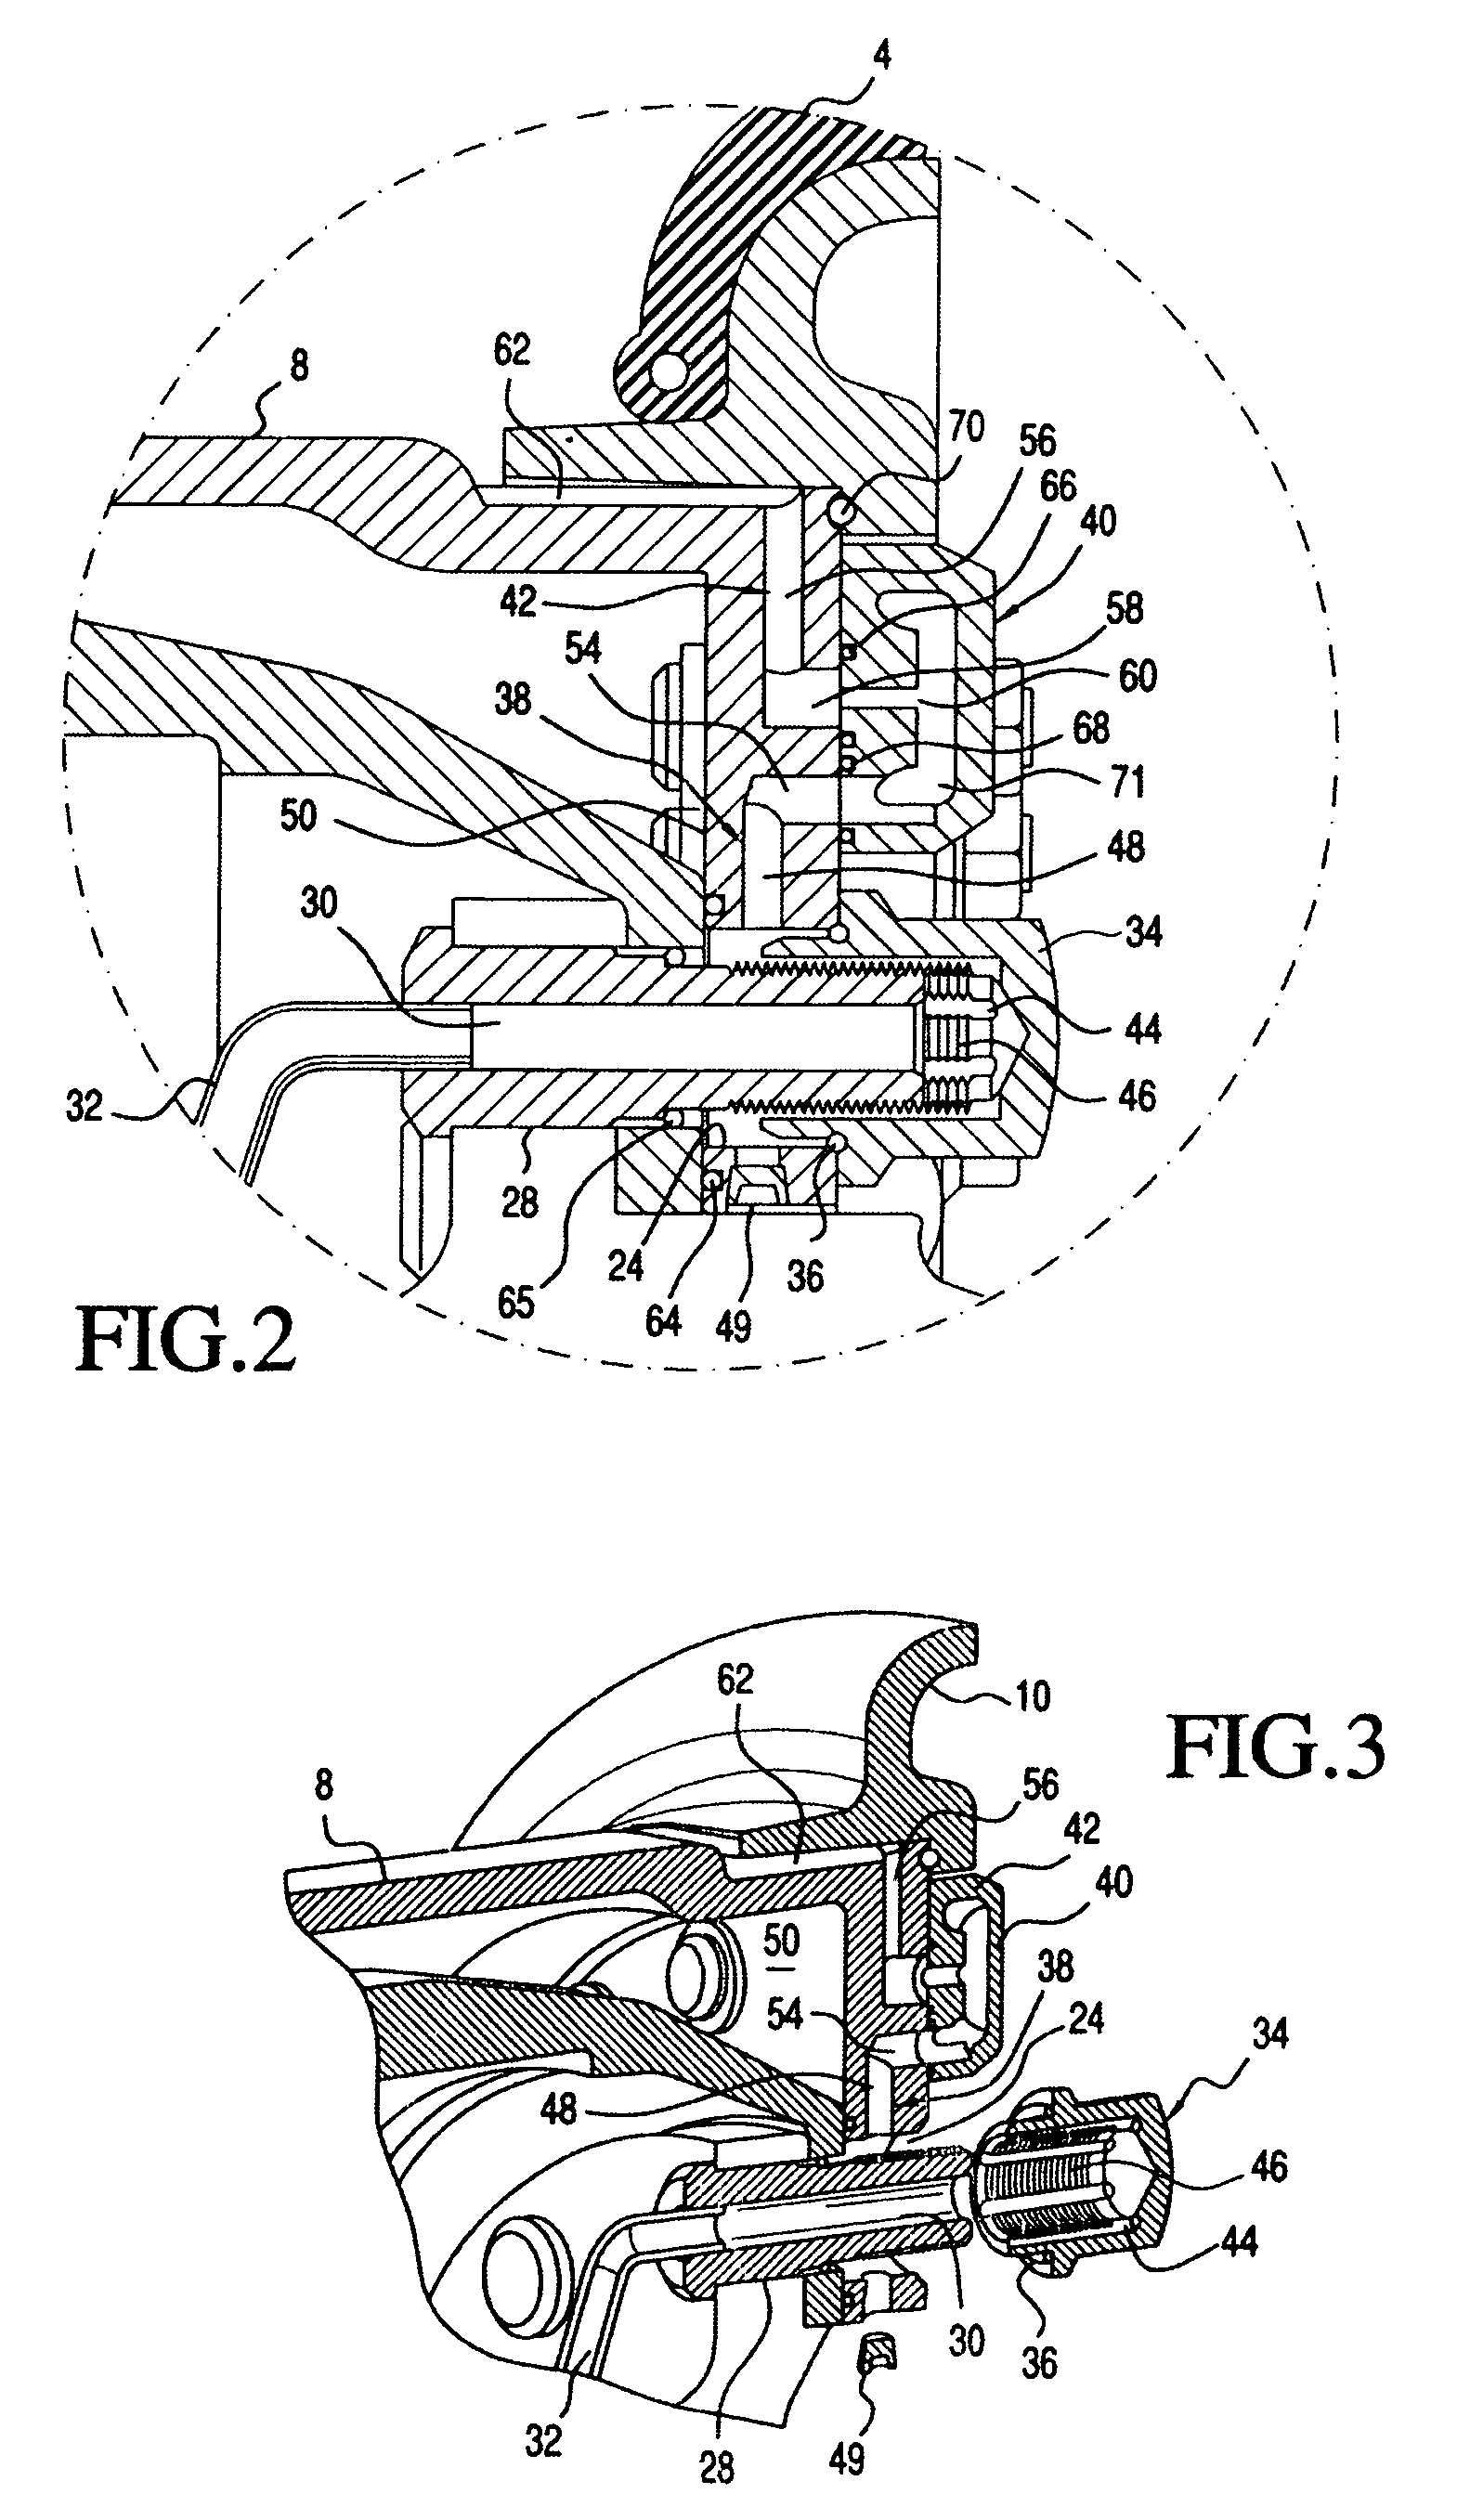 Vehicle wheel assembly with a hollow stud and internal passageways connected to a CTIS